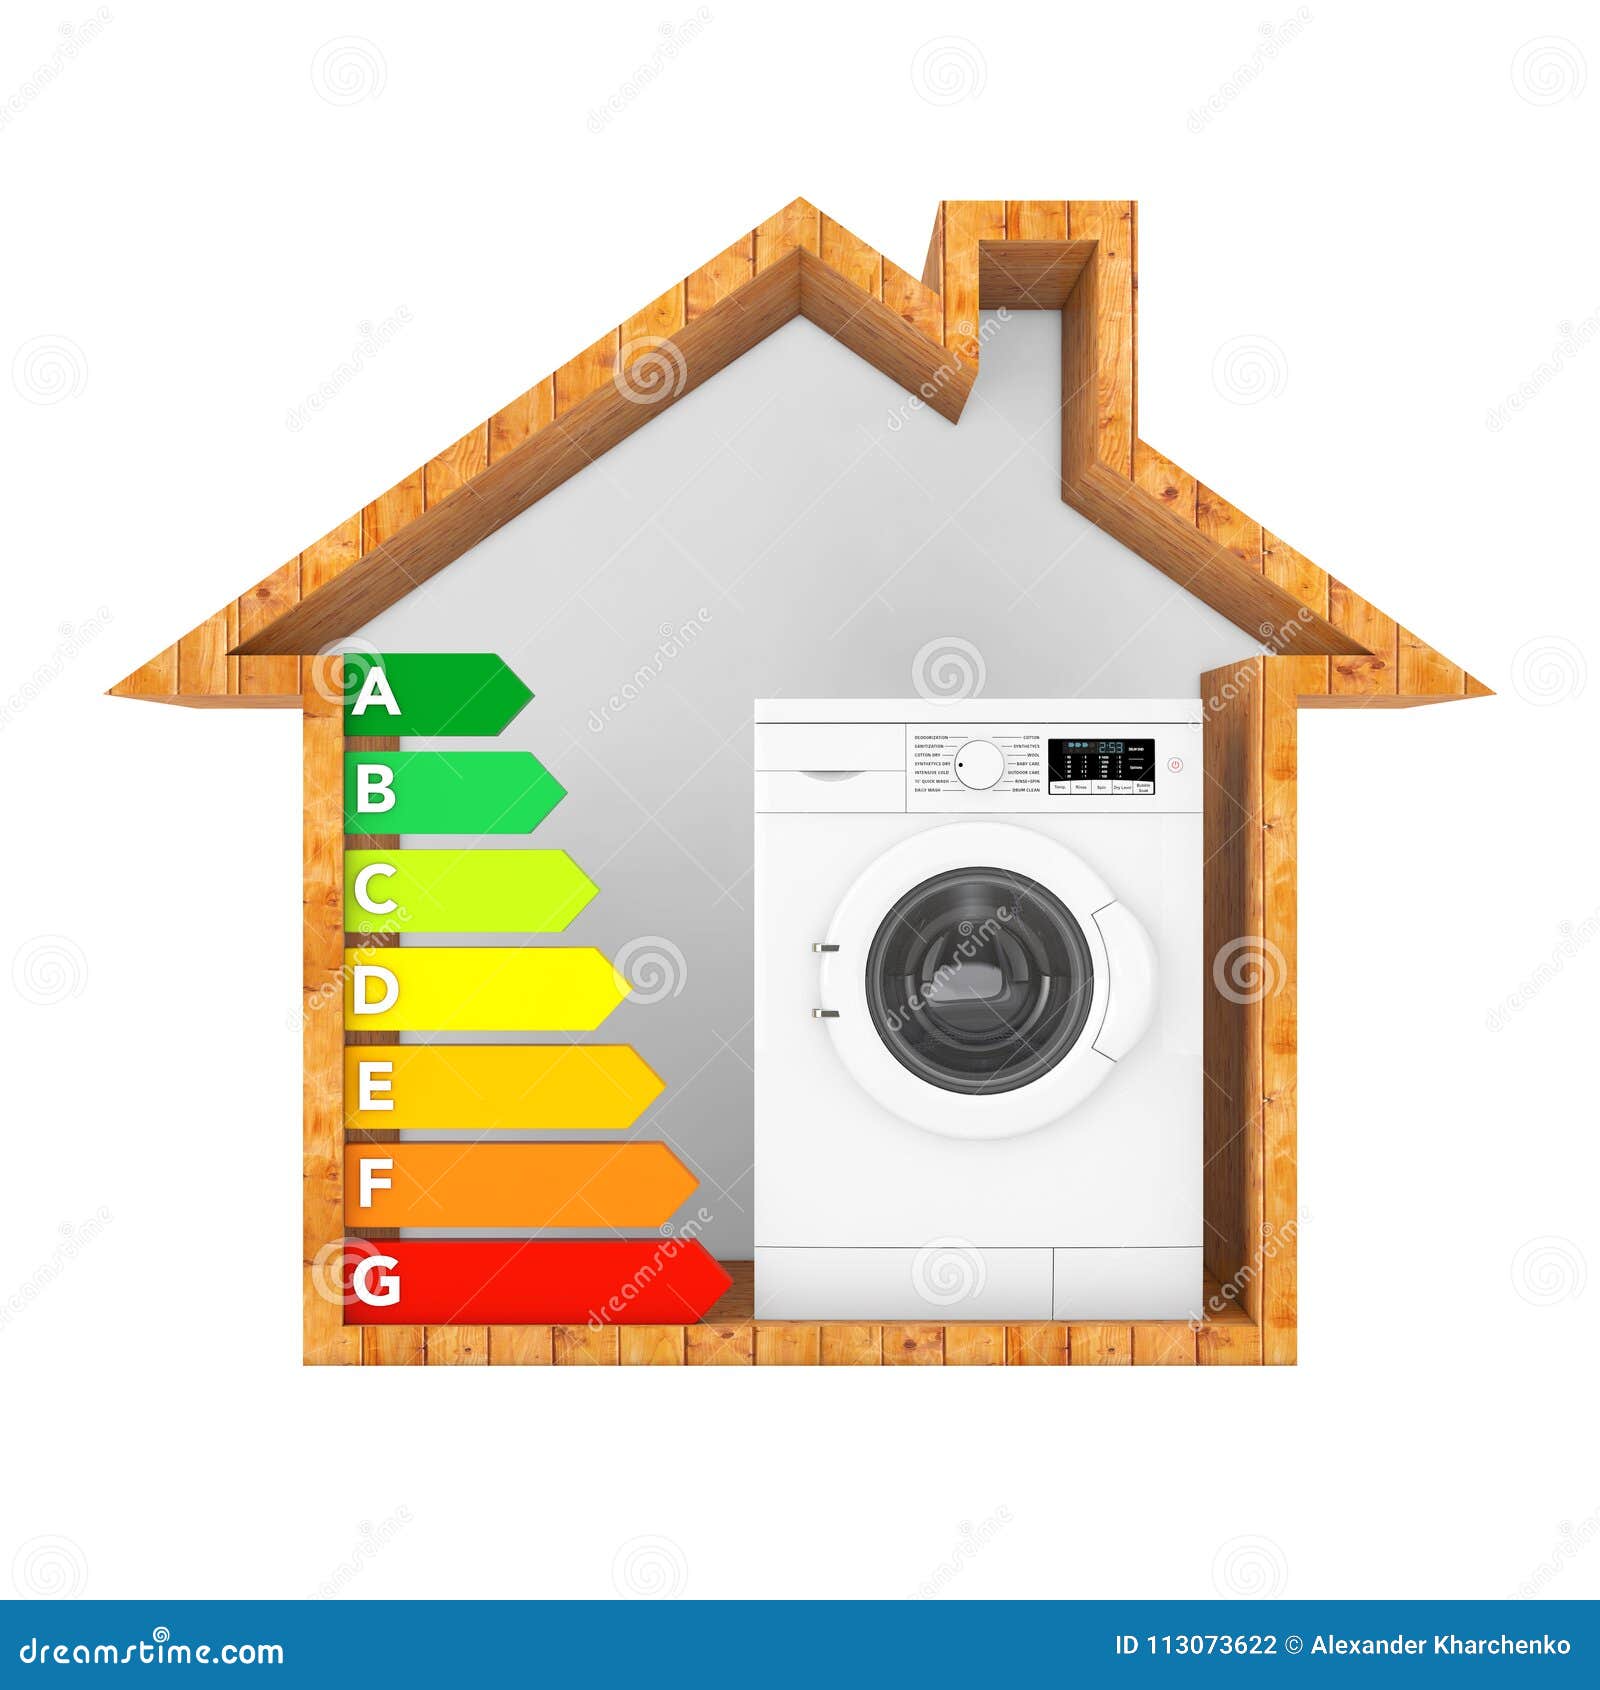 modern-washing-machine-with-energy-efficiency-rating-chart-in-ab-stock